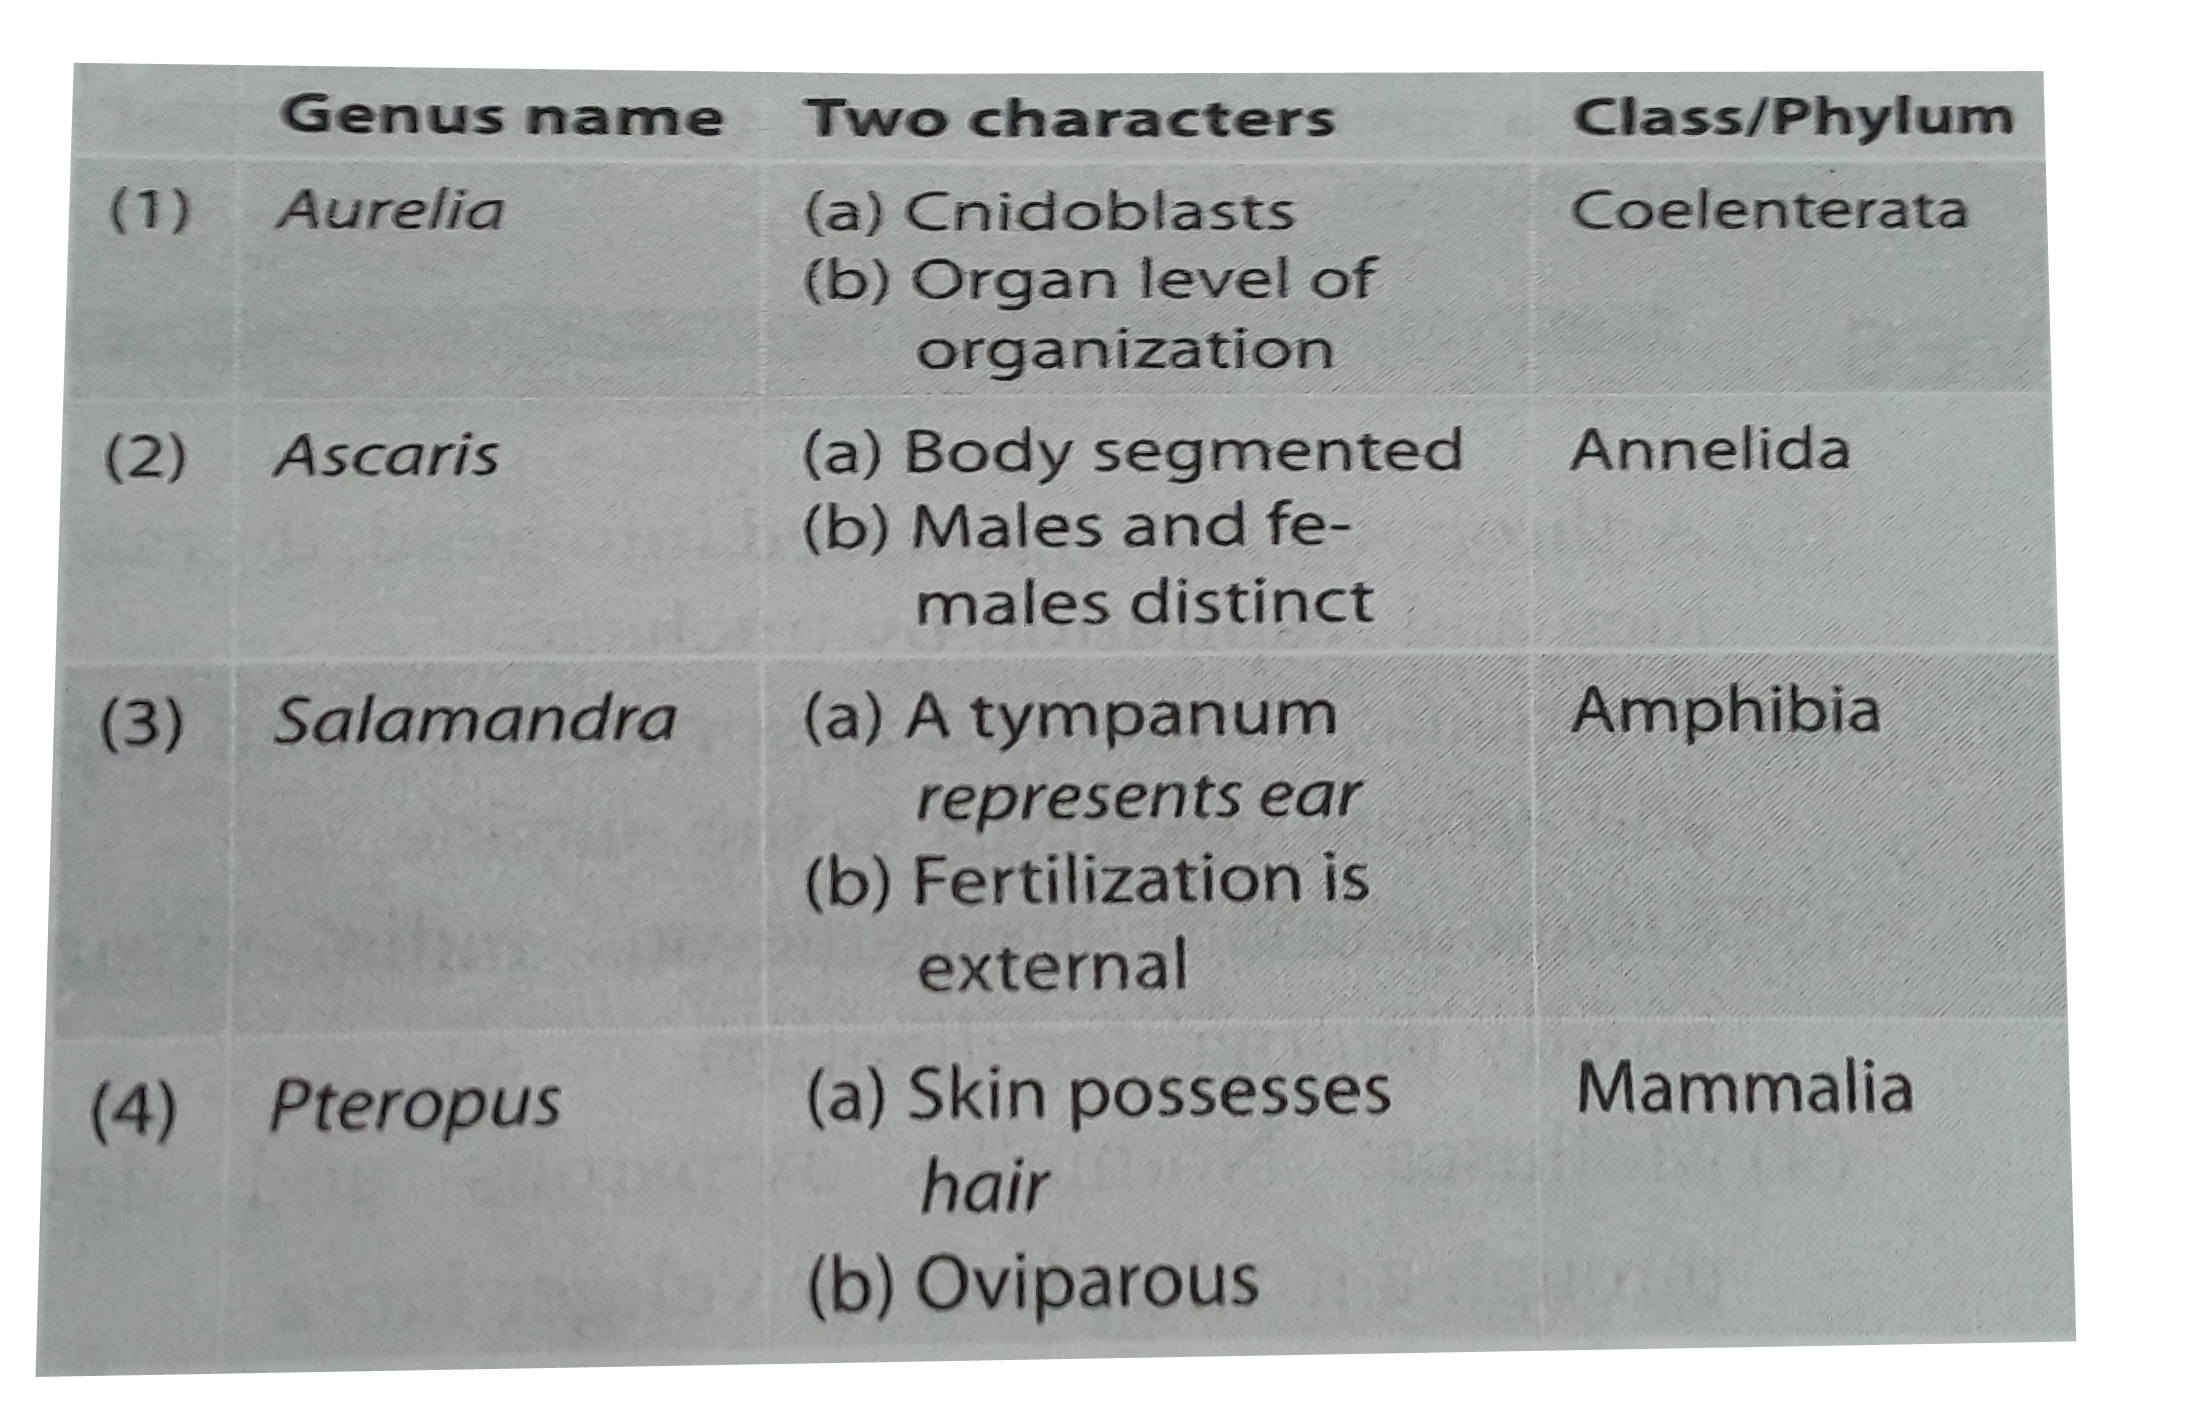 In which one of the following the geneus name , its two characters and its class / phylum are correctly matched ?